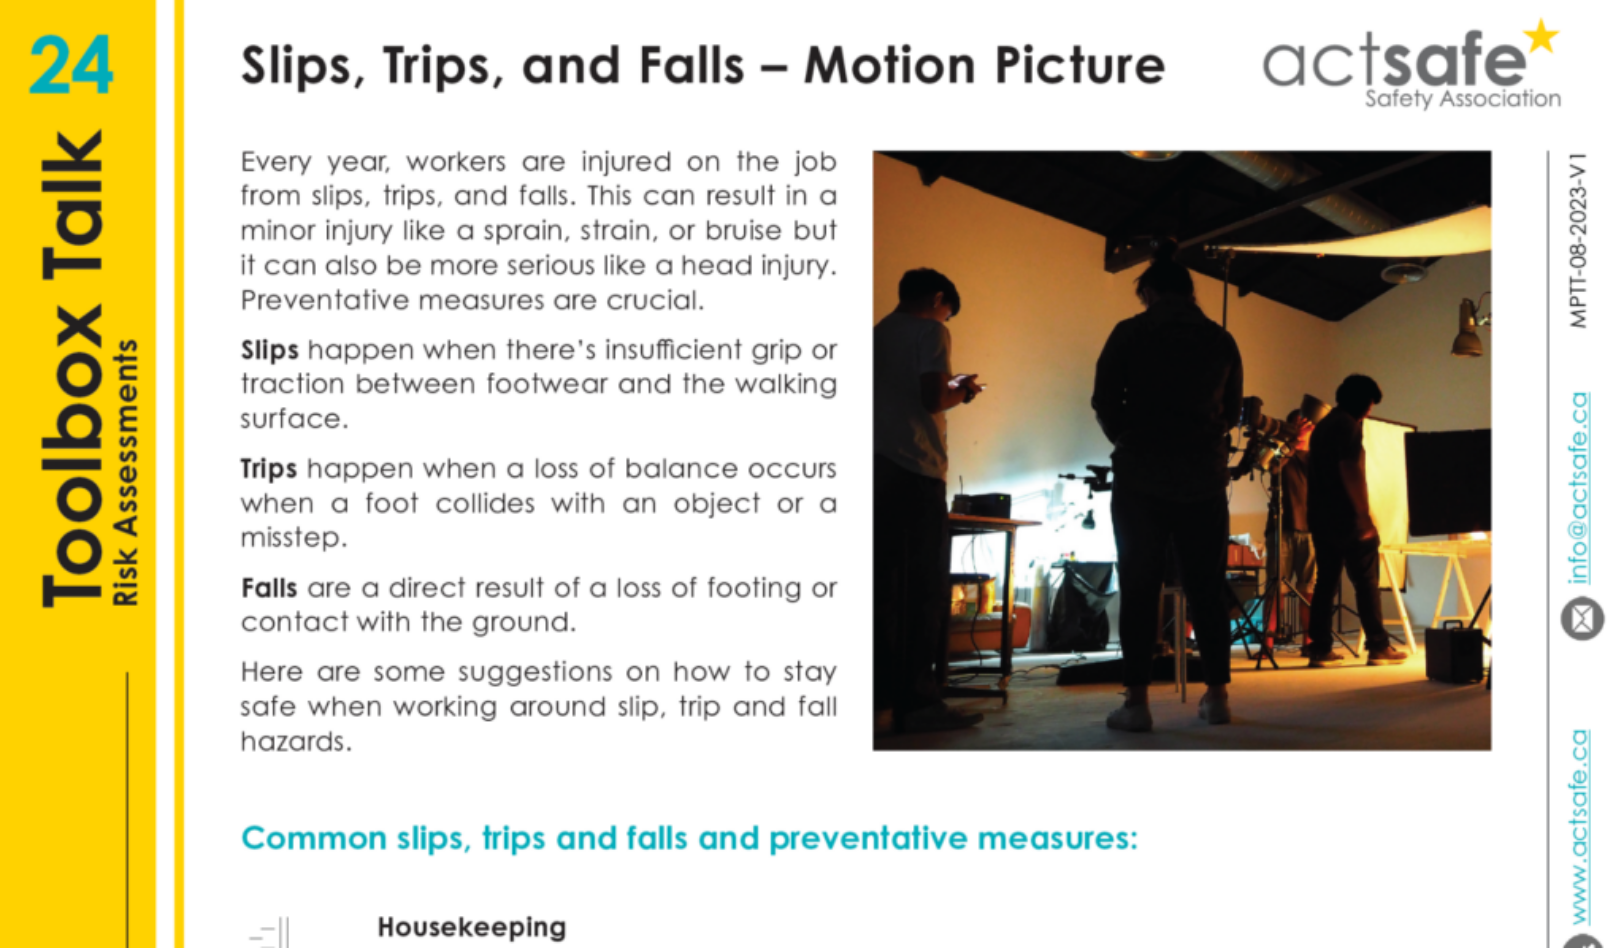 Slips, Trips, and Falls – Motion Picture